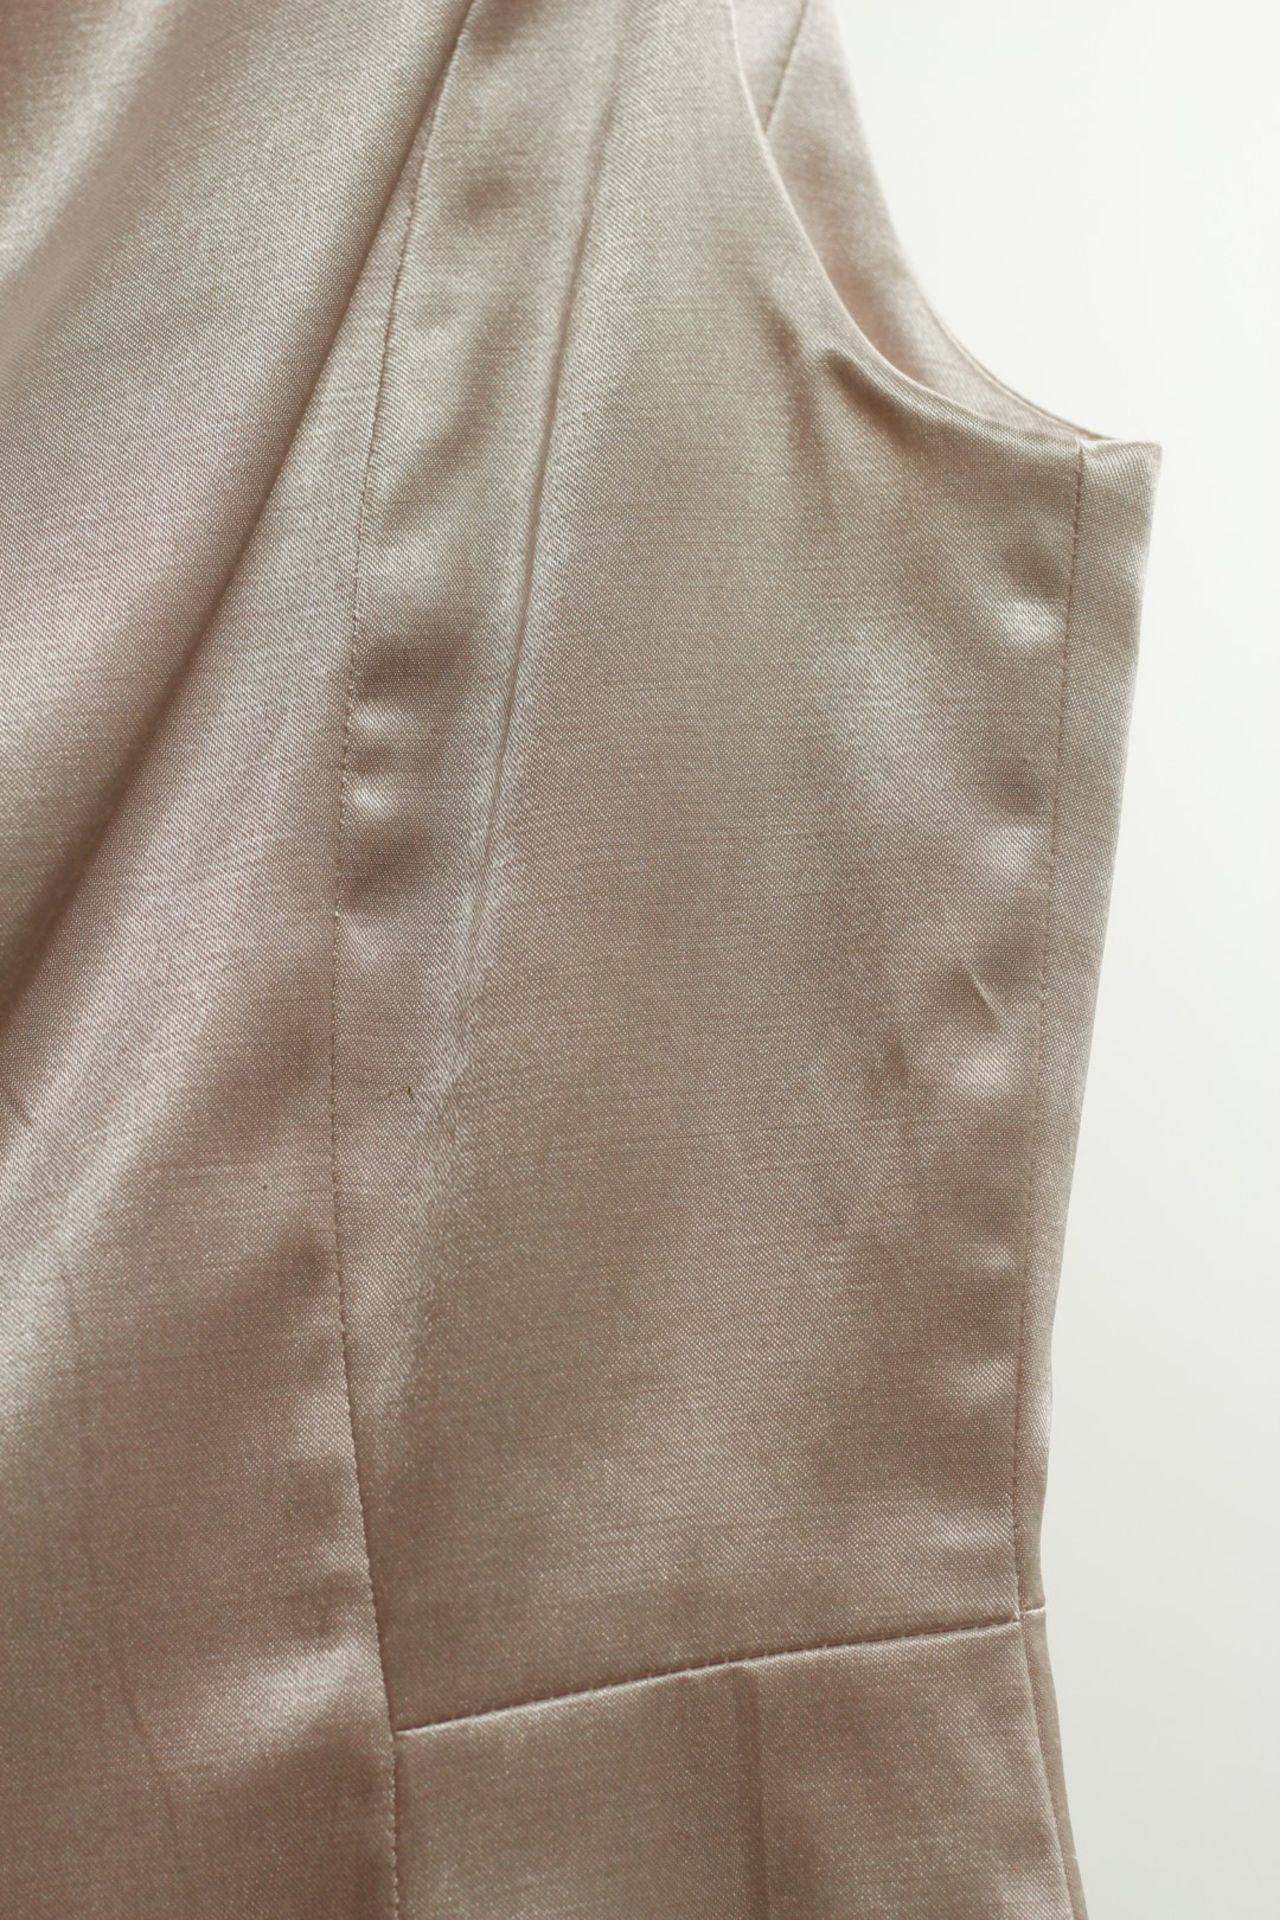 1 x Boutique Le Duc Pale Rose Vest - From a High End Clothing Boutique In The - Image 8 of 8